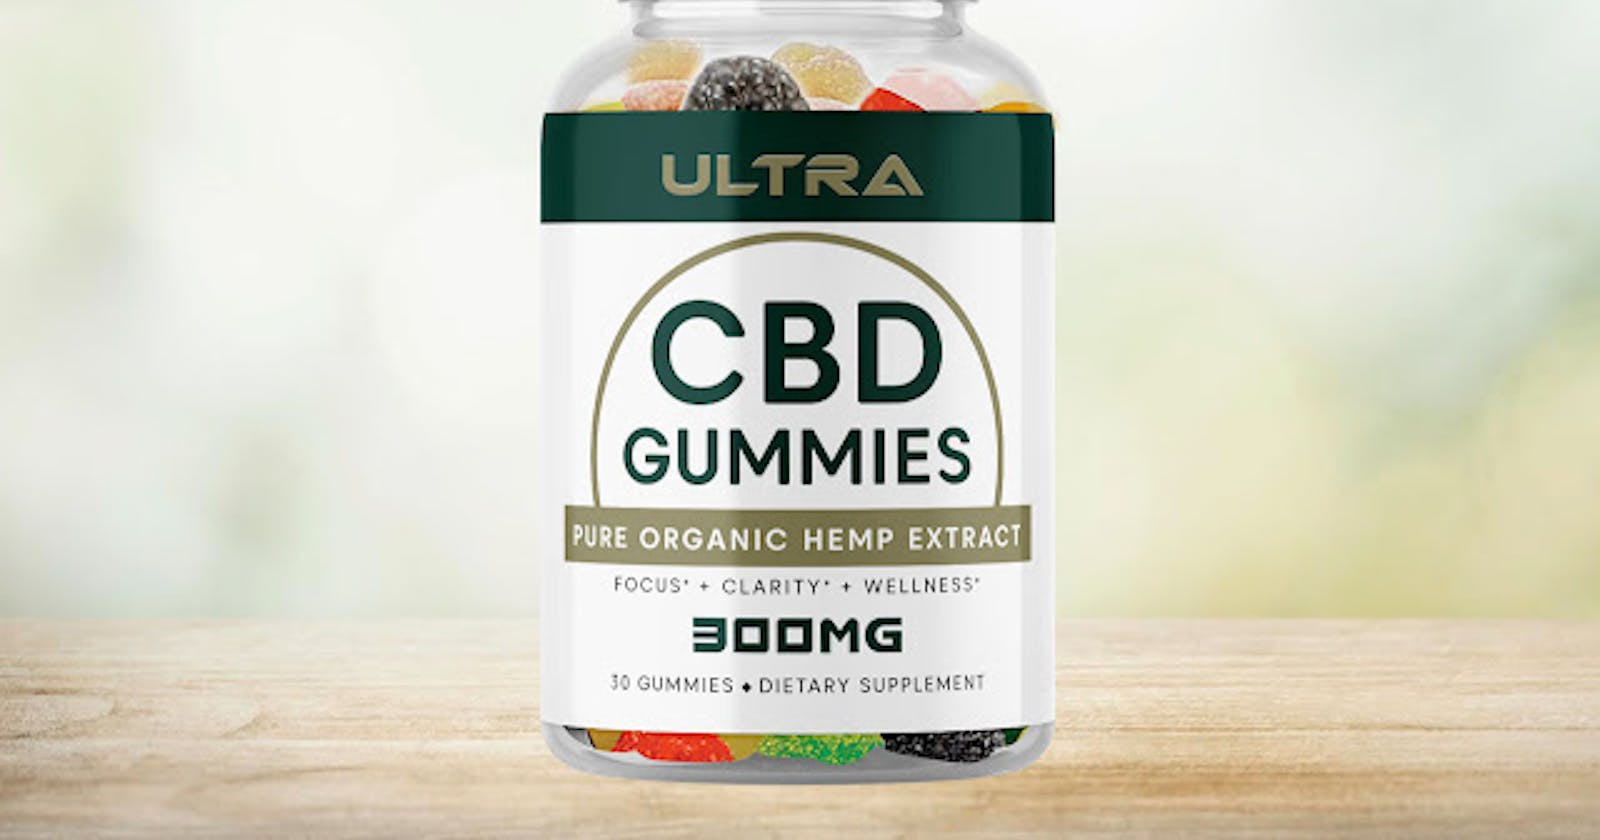 Soothing Benefits of Ultra CBD Gummies in Mexico